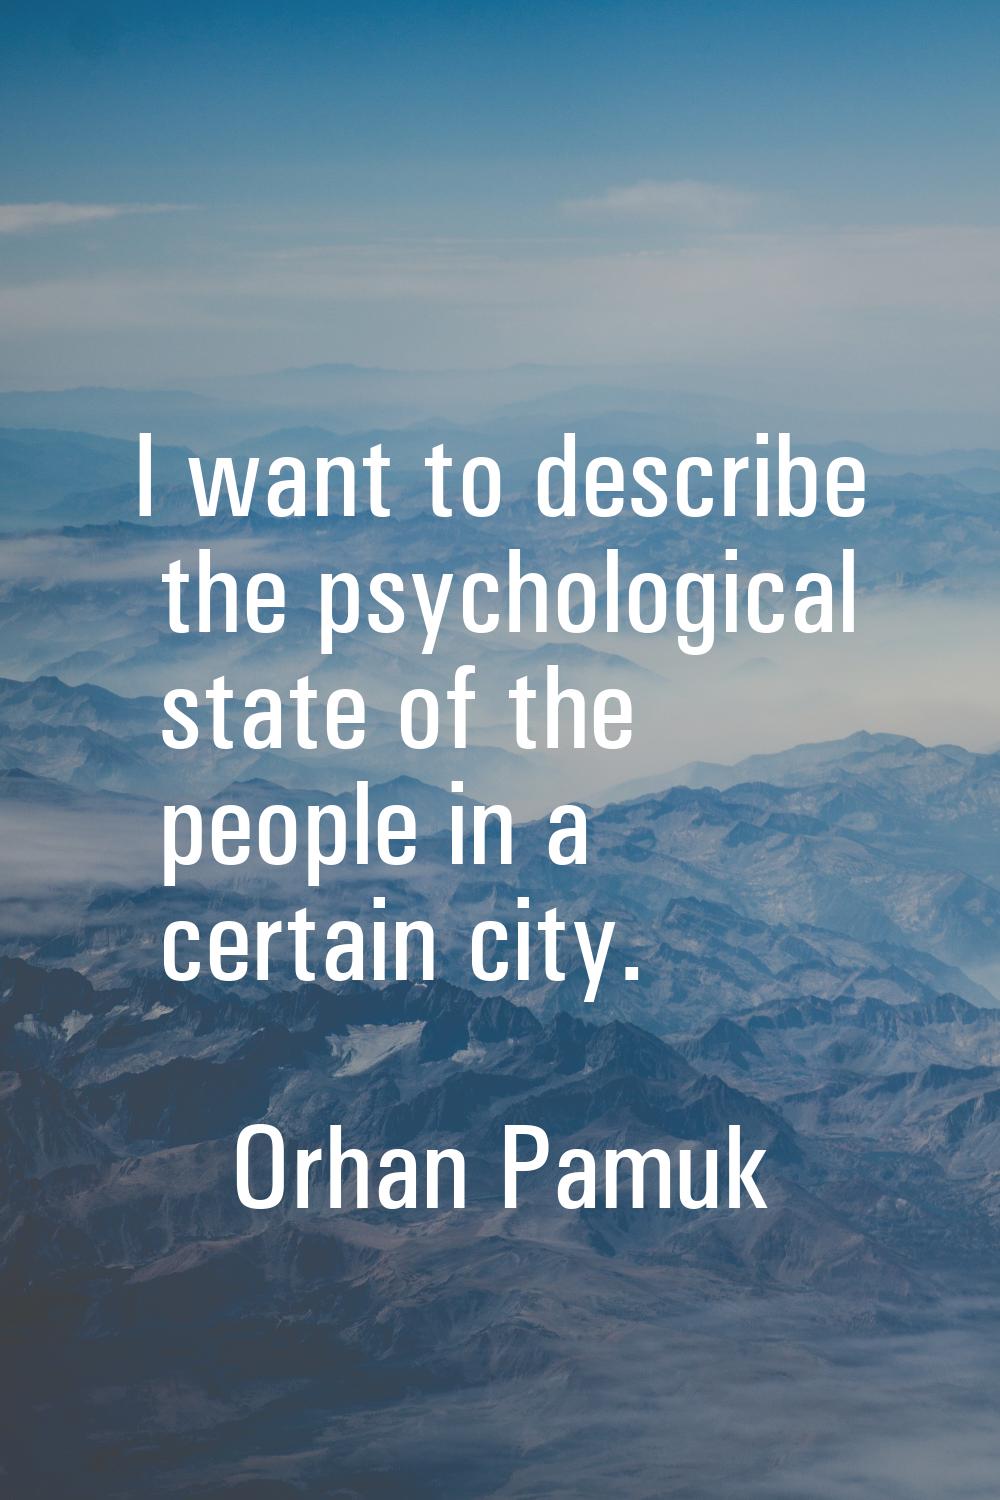 I want to describe the psychological state of the people in a certain city.